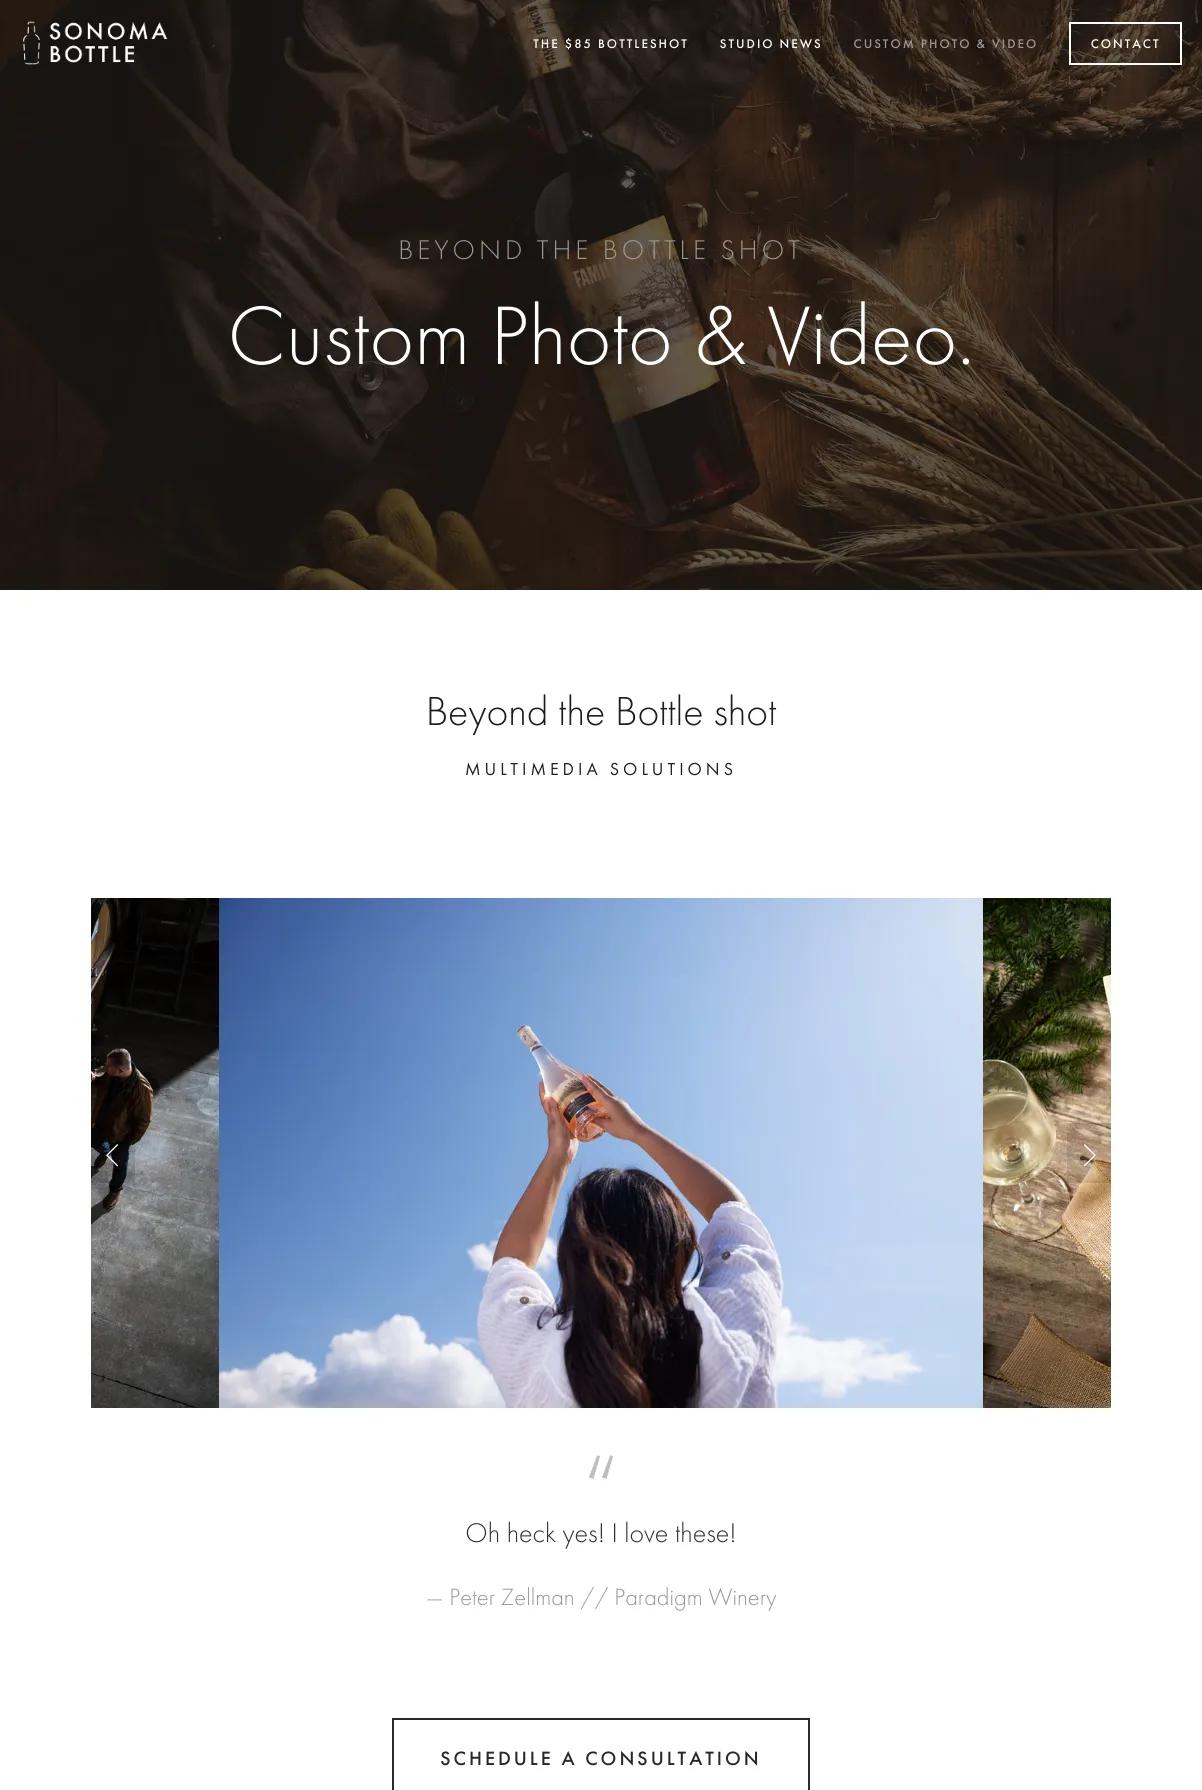 Screenshot 3 of Sonoma Bottle (Example Squarespace Photography Website)